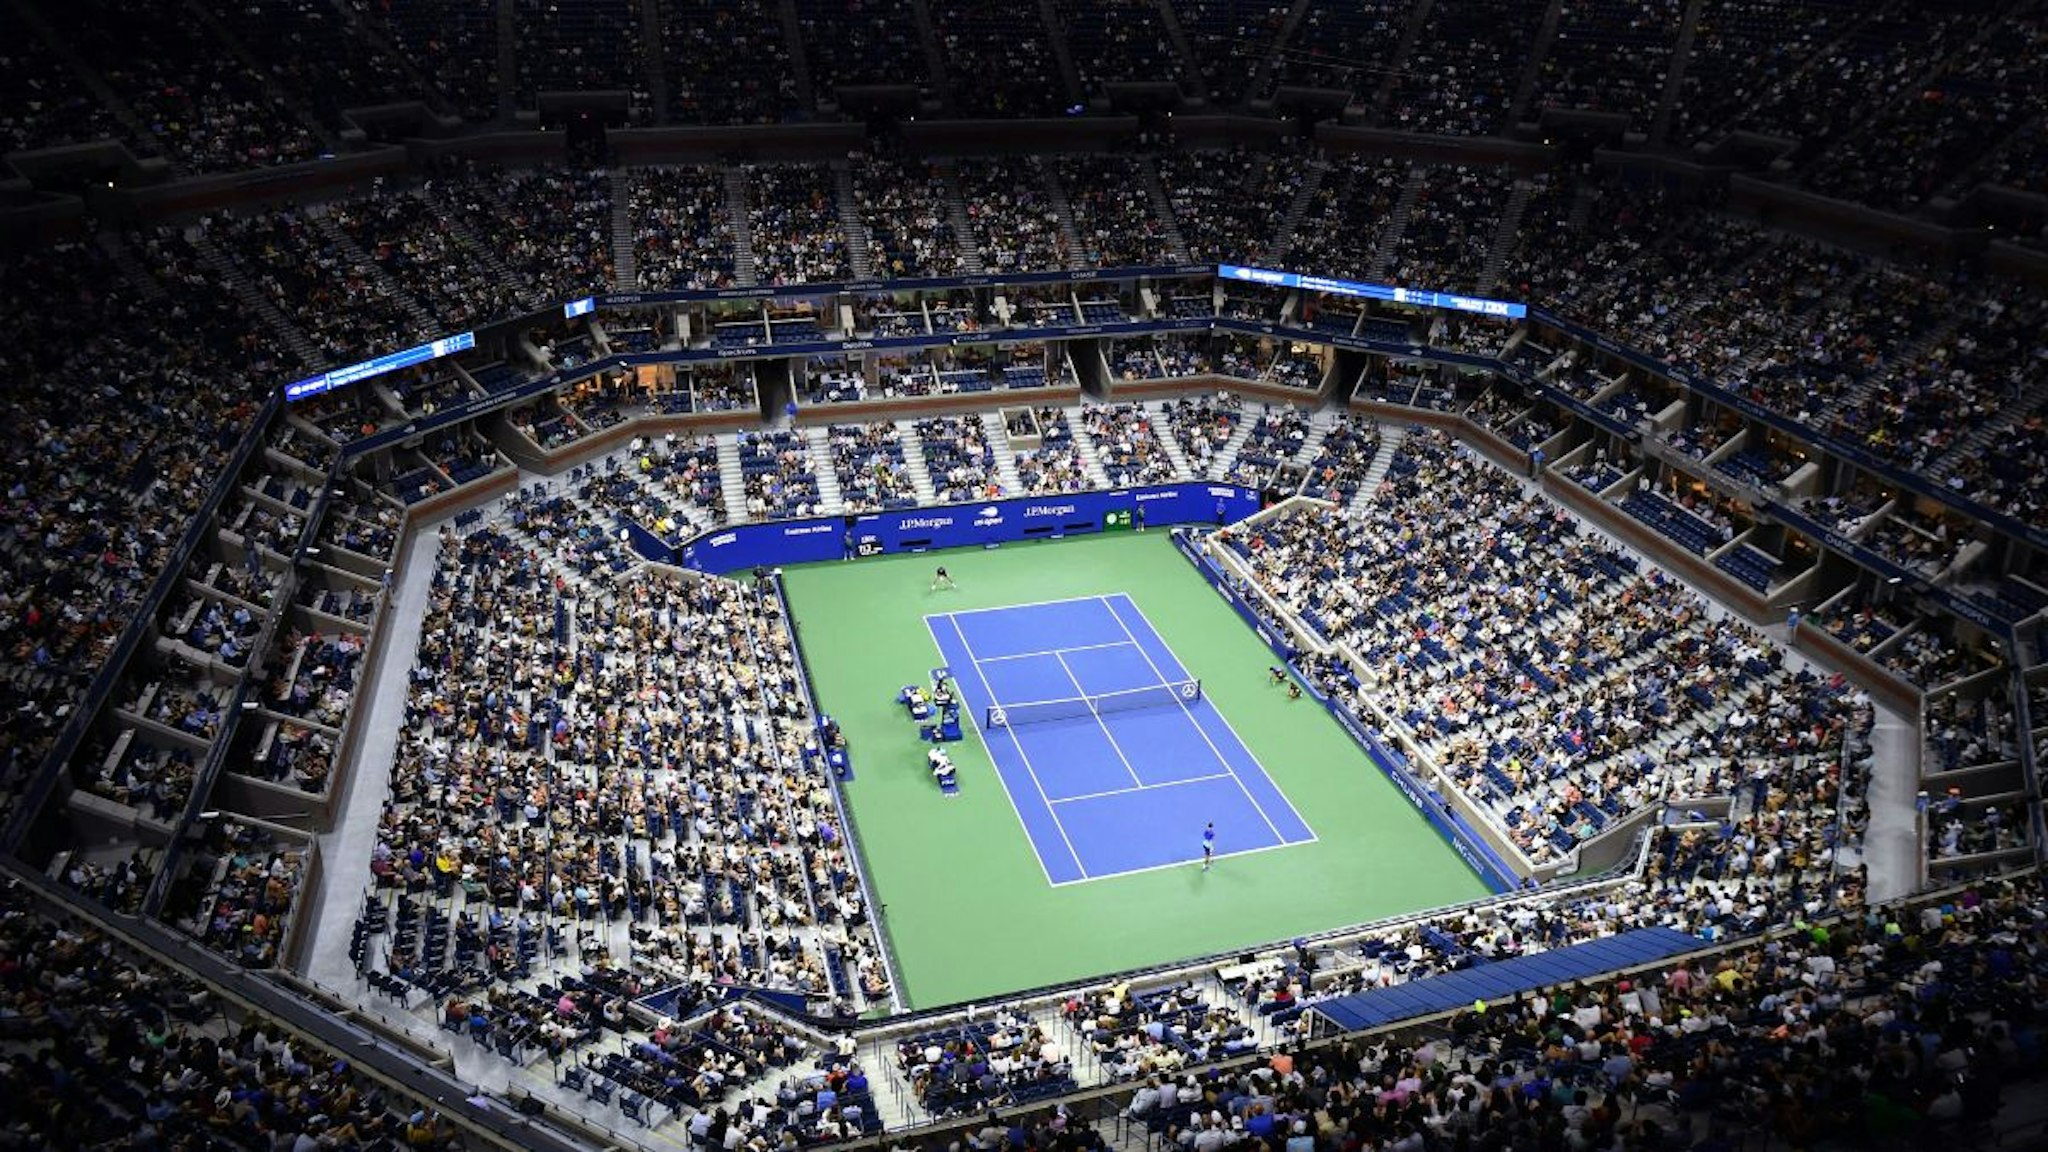 An overview shows Arthur Ashe Stadium during the 2021 US Open Tennis tournament men's singles first round match between Serbia's Novak Djokovic (bottom) and Denmark's Holger Rune at the USTA Billie Jean King National Tennis Center in New York, on August 31, 2021.